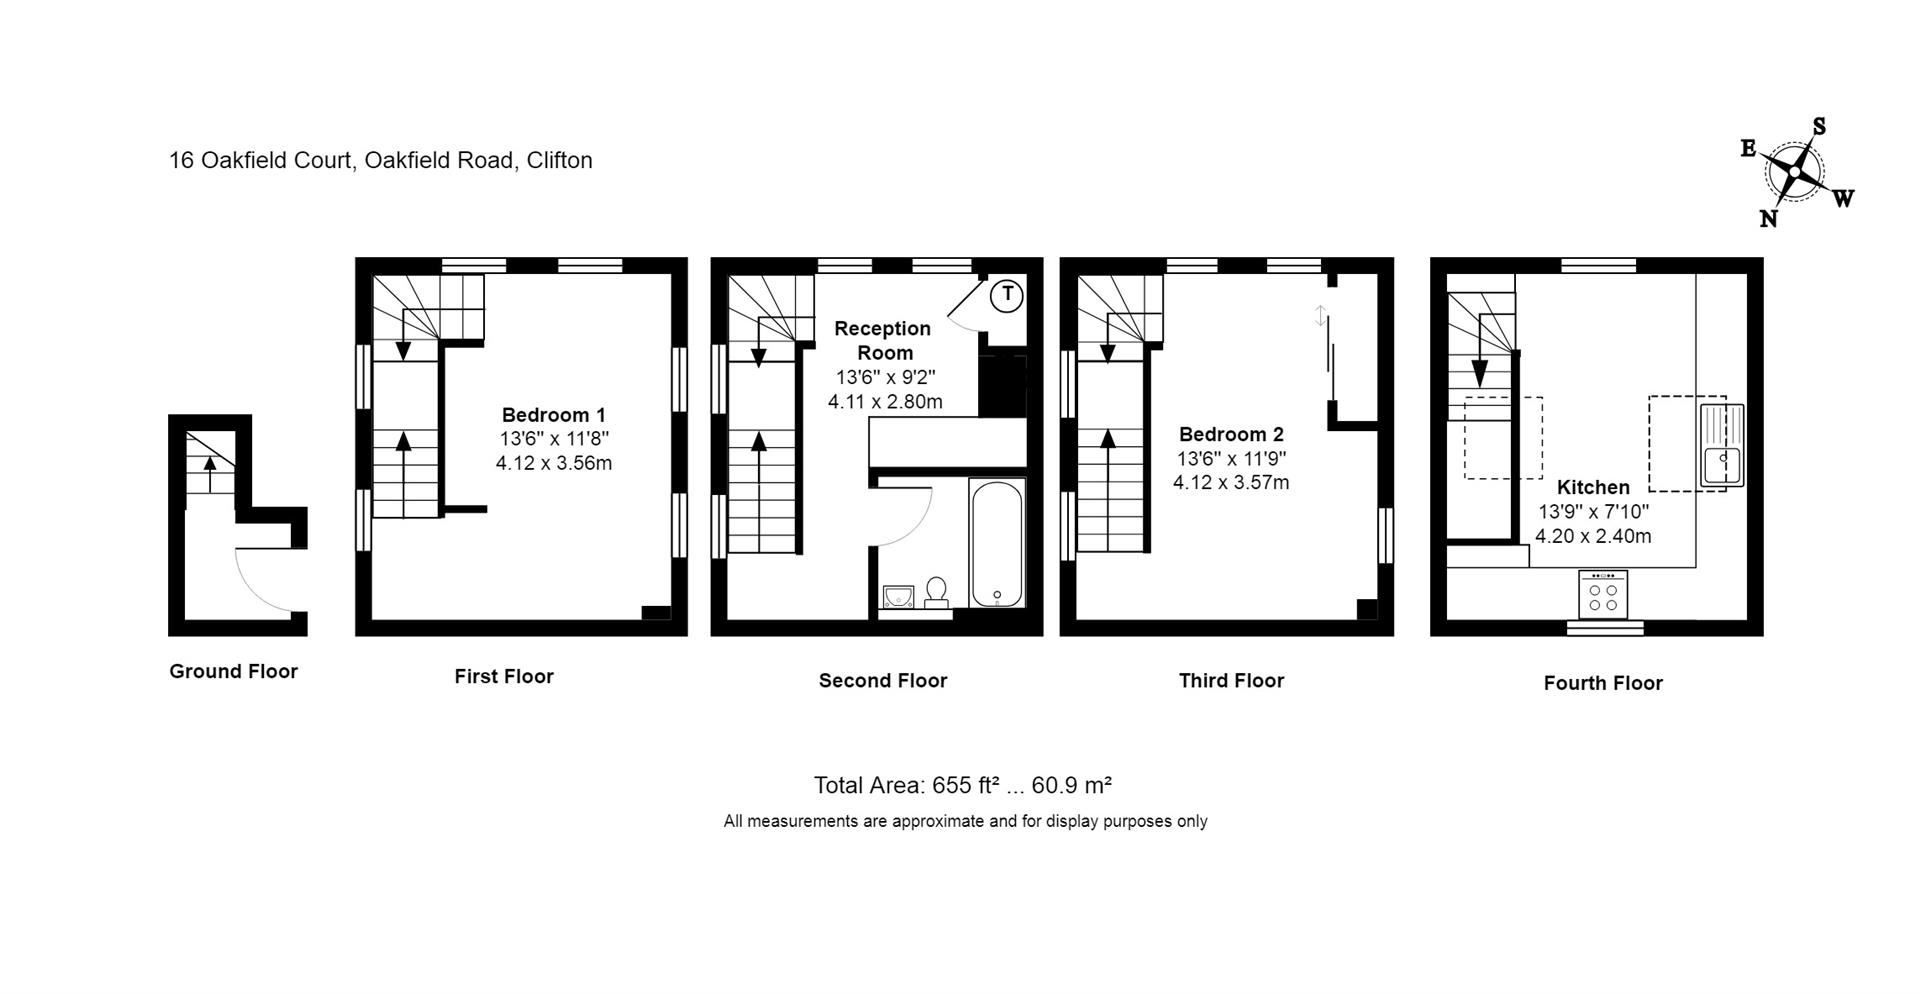 Floorplans For Oakfield Road, Clifton